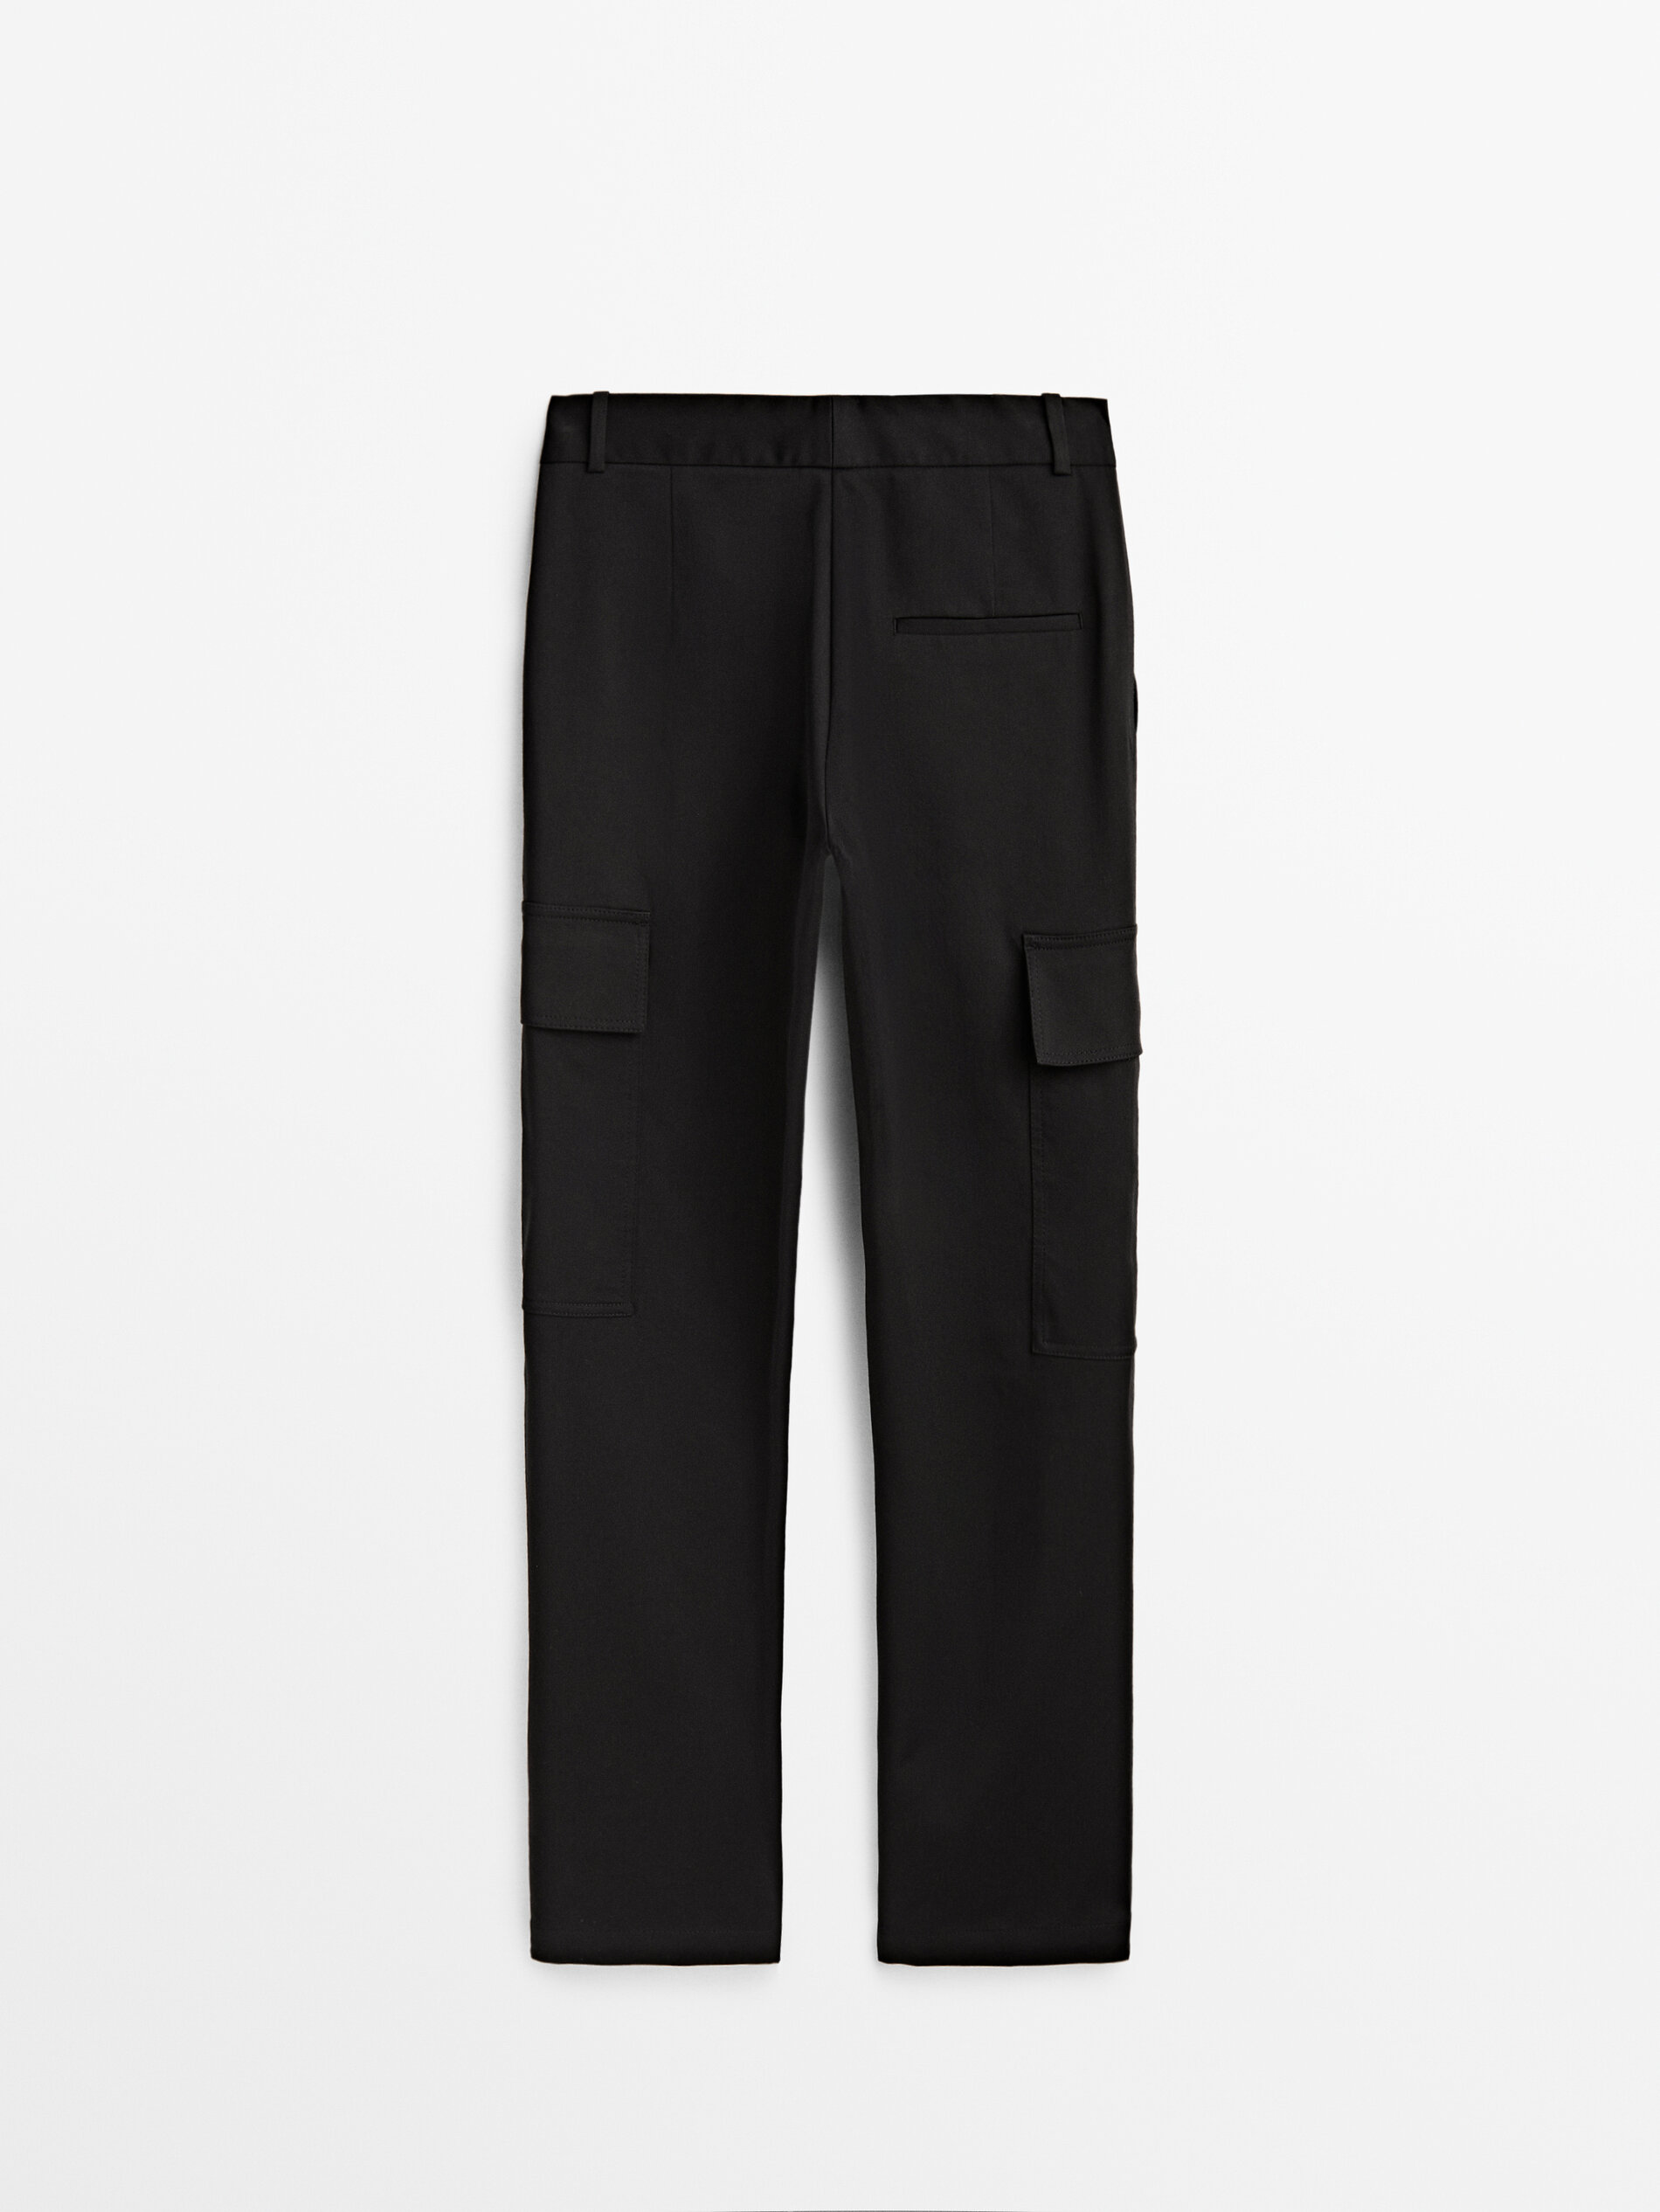 CARGO TROUSERS WITH TOPSTITCHING  Black  ZARA India